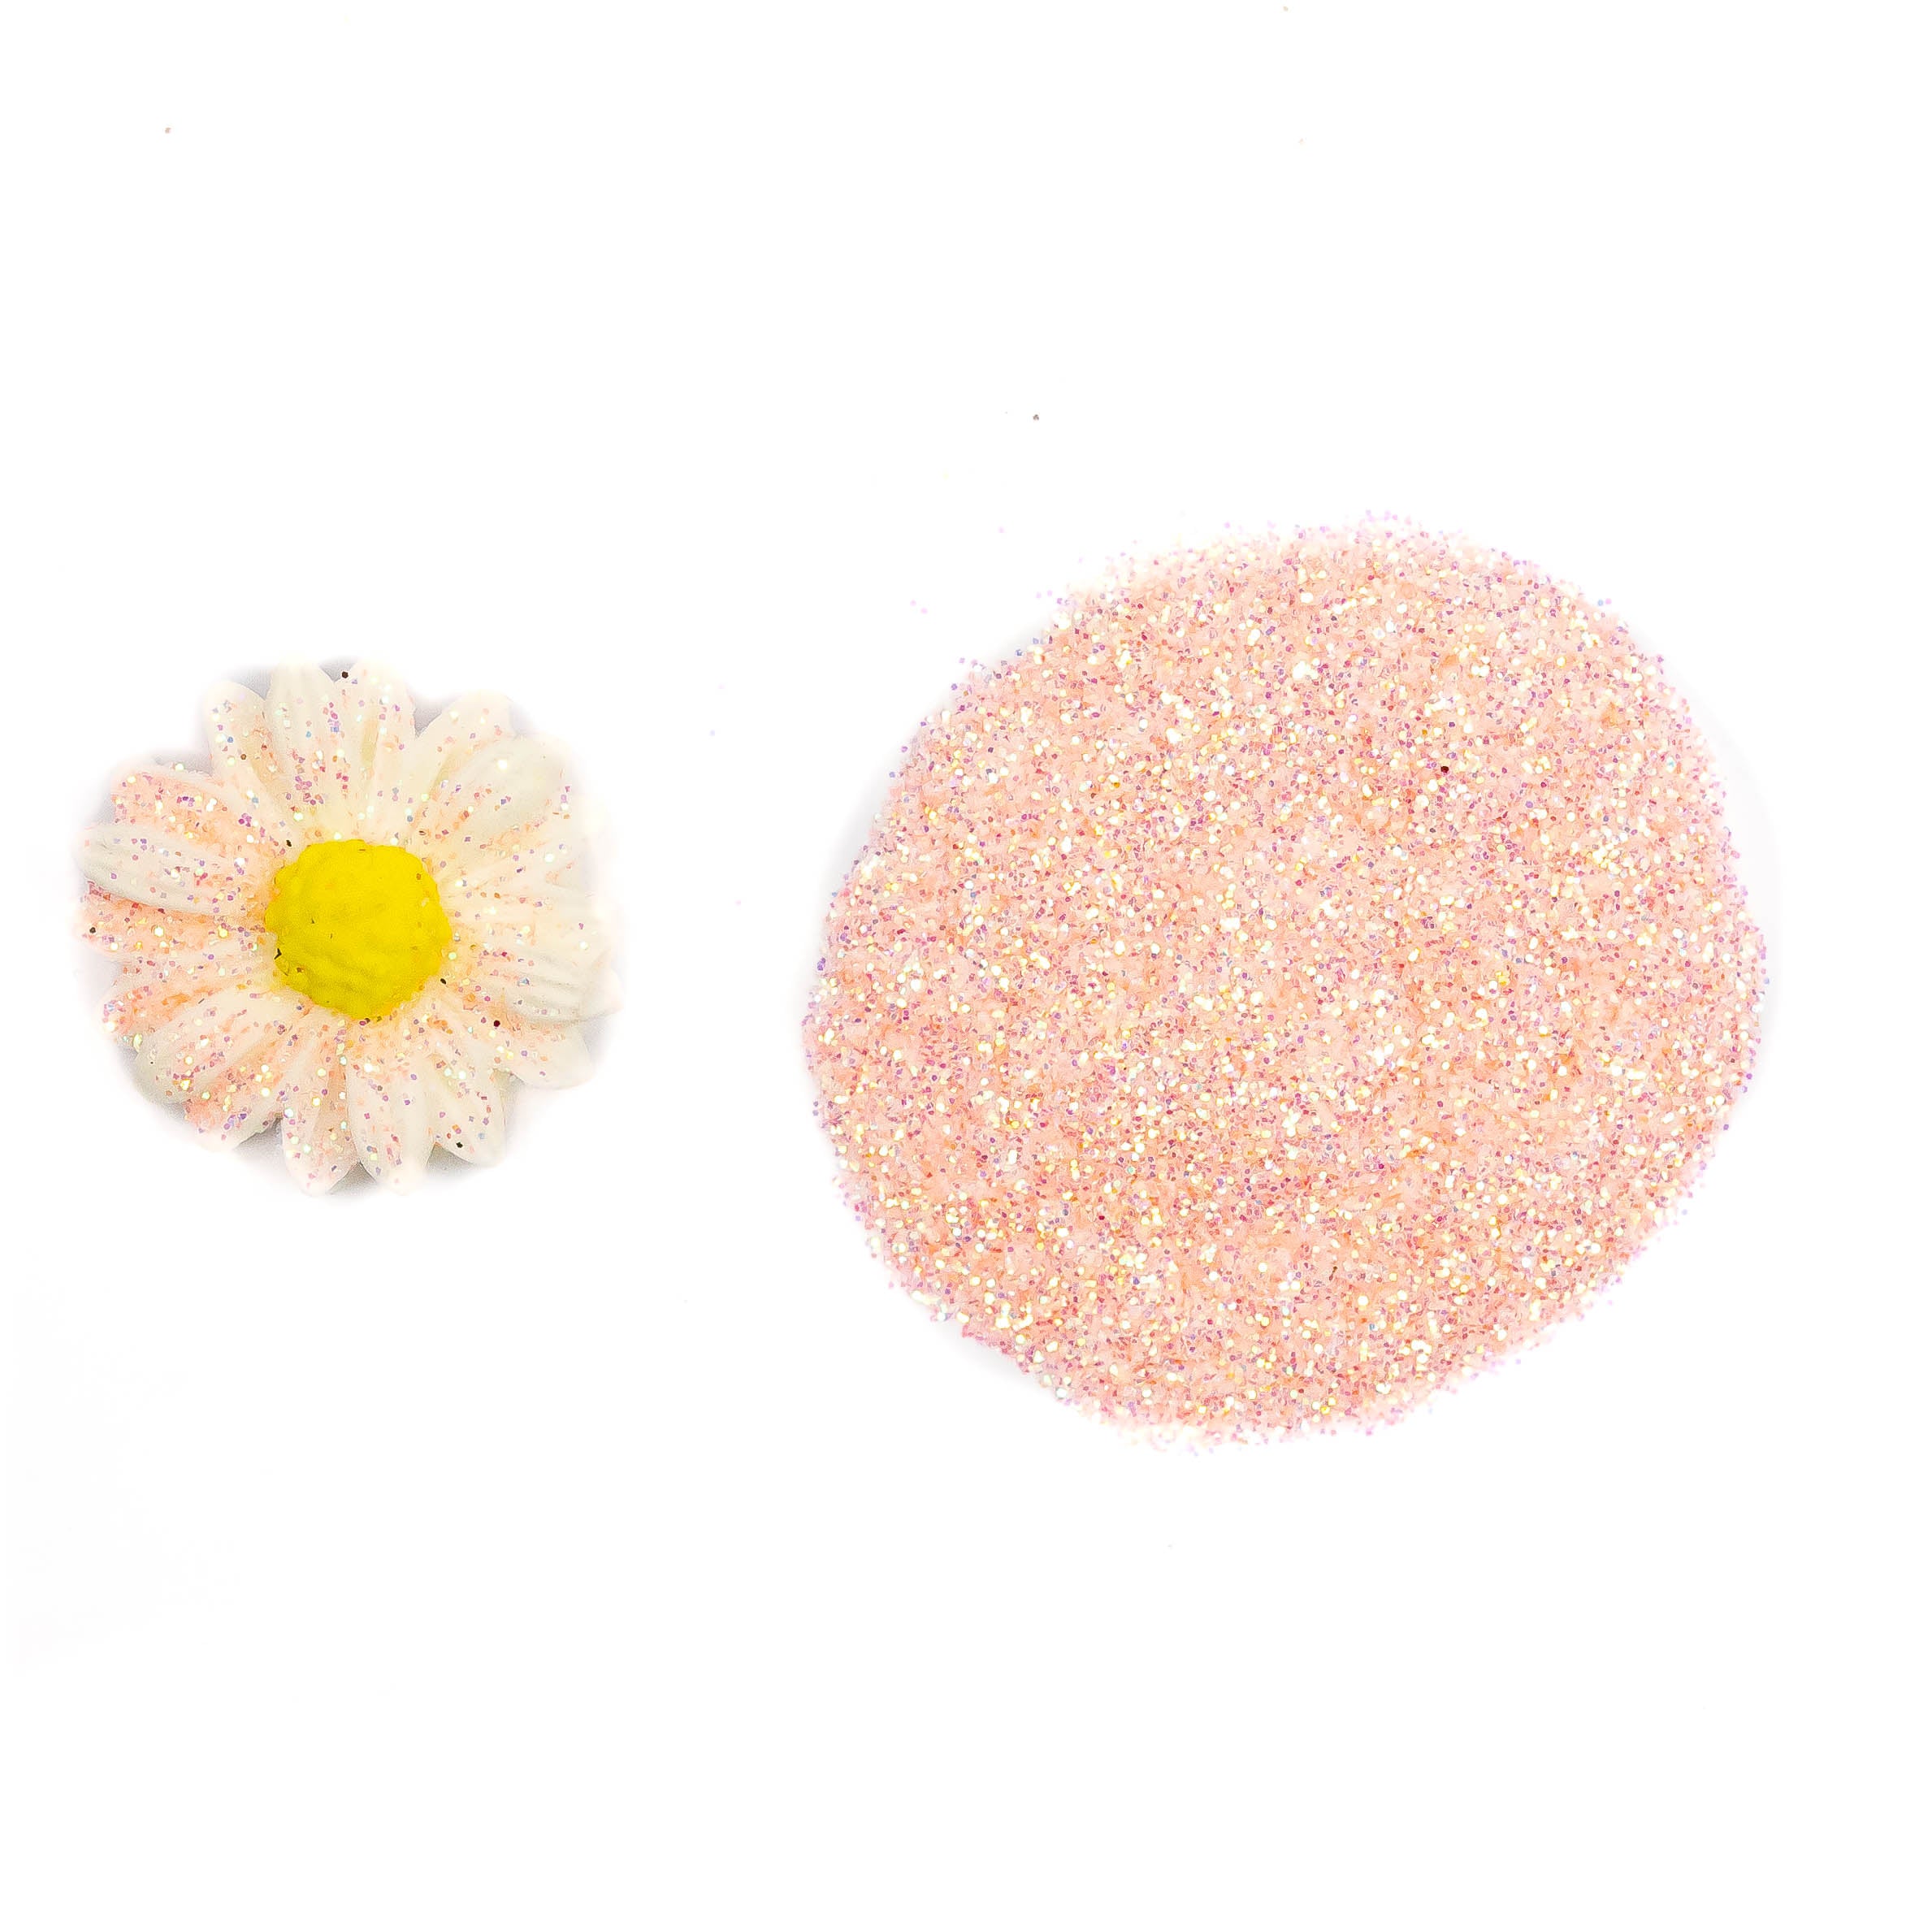 Buy Wholesale China Assorted Craft Glitter,extra Resin Glitter